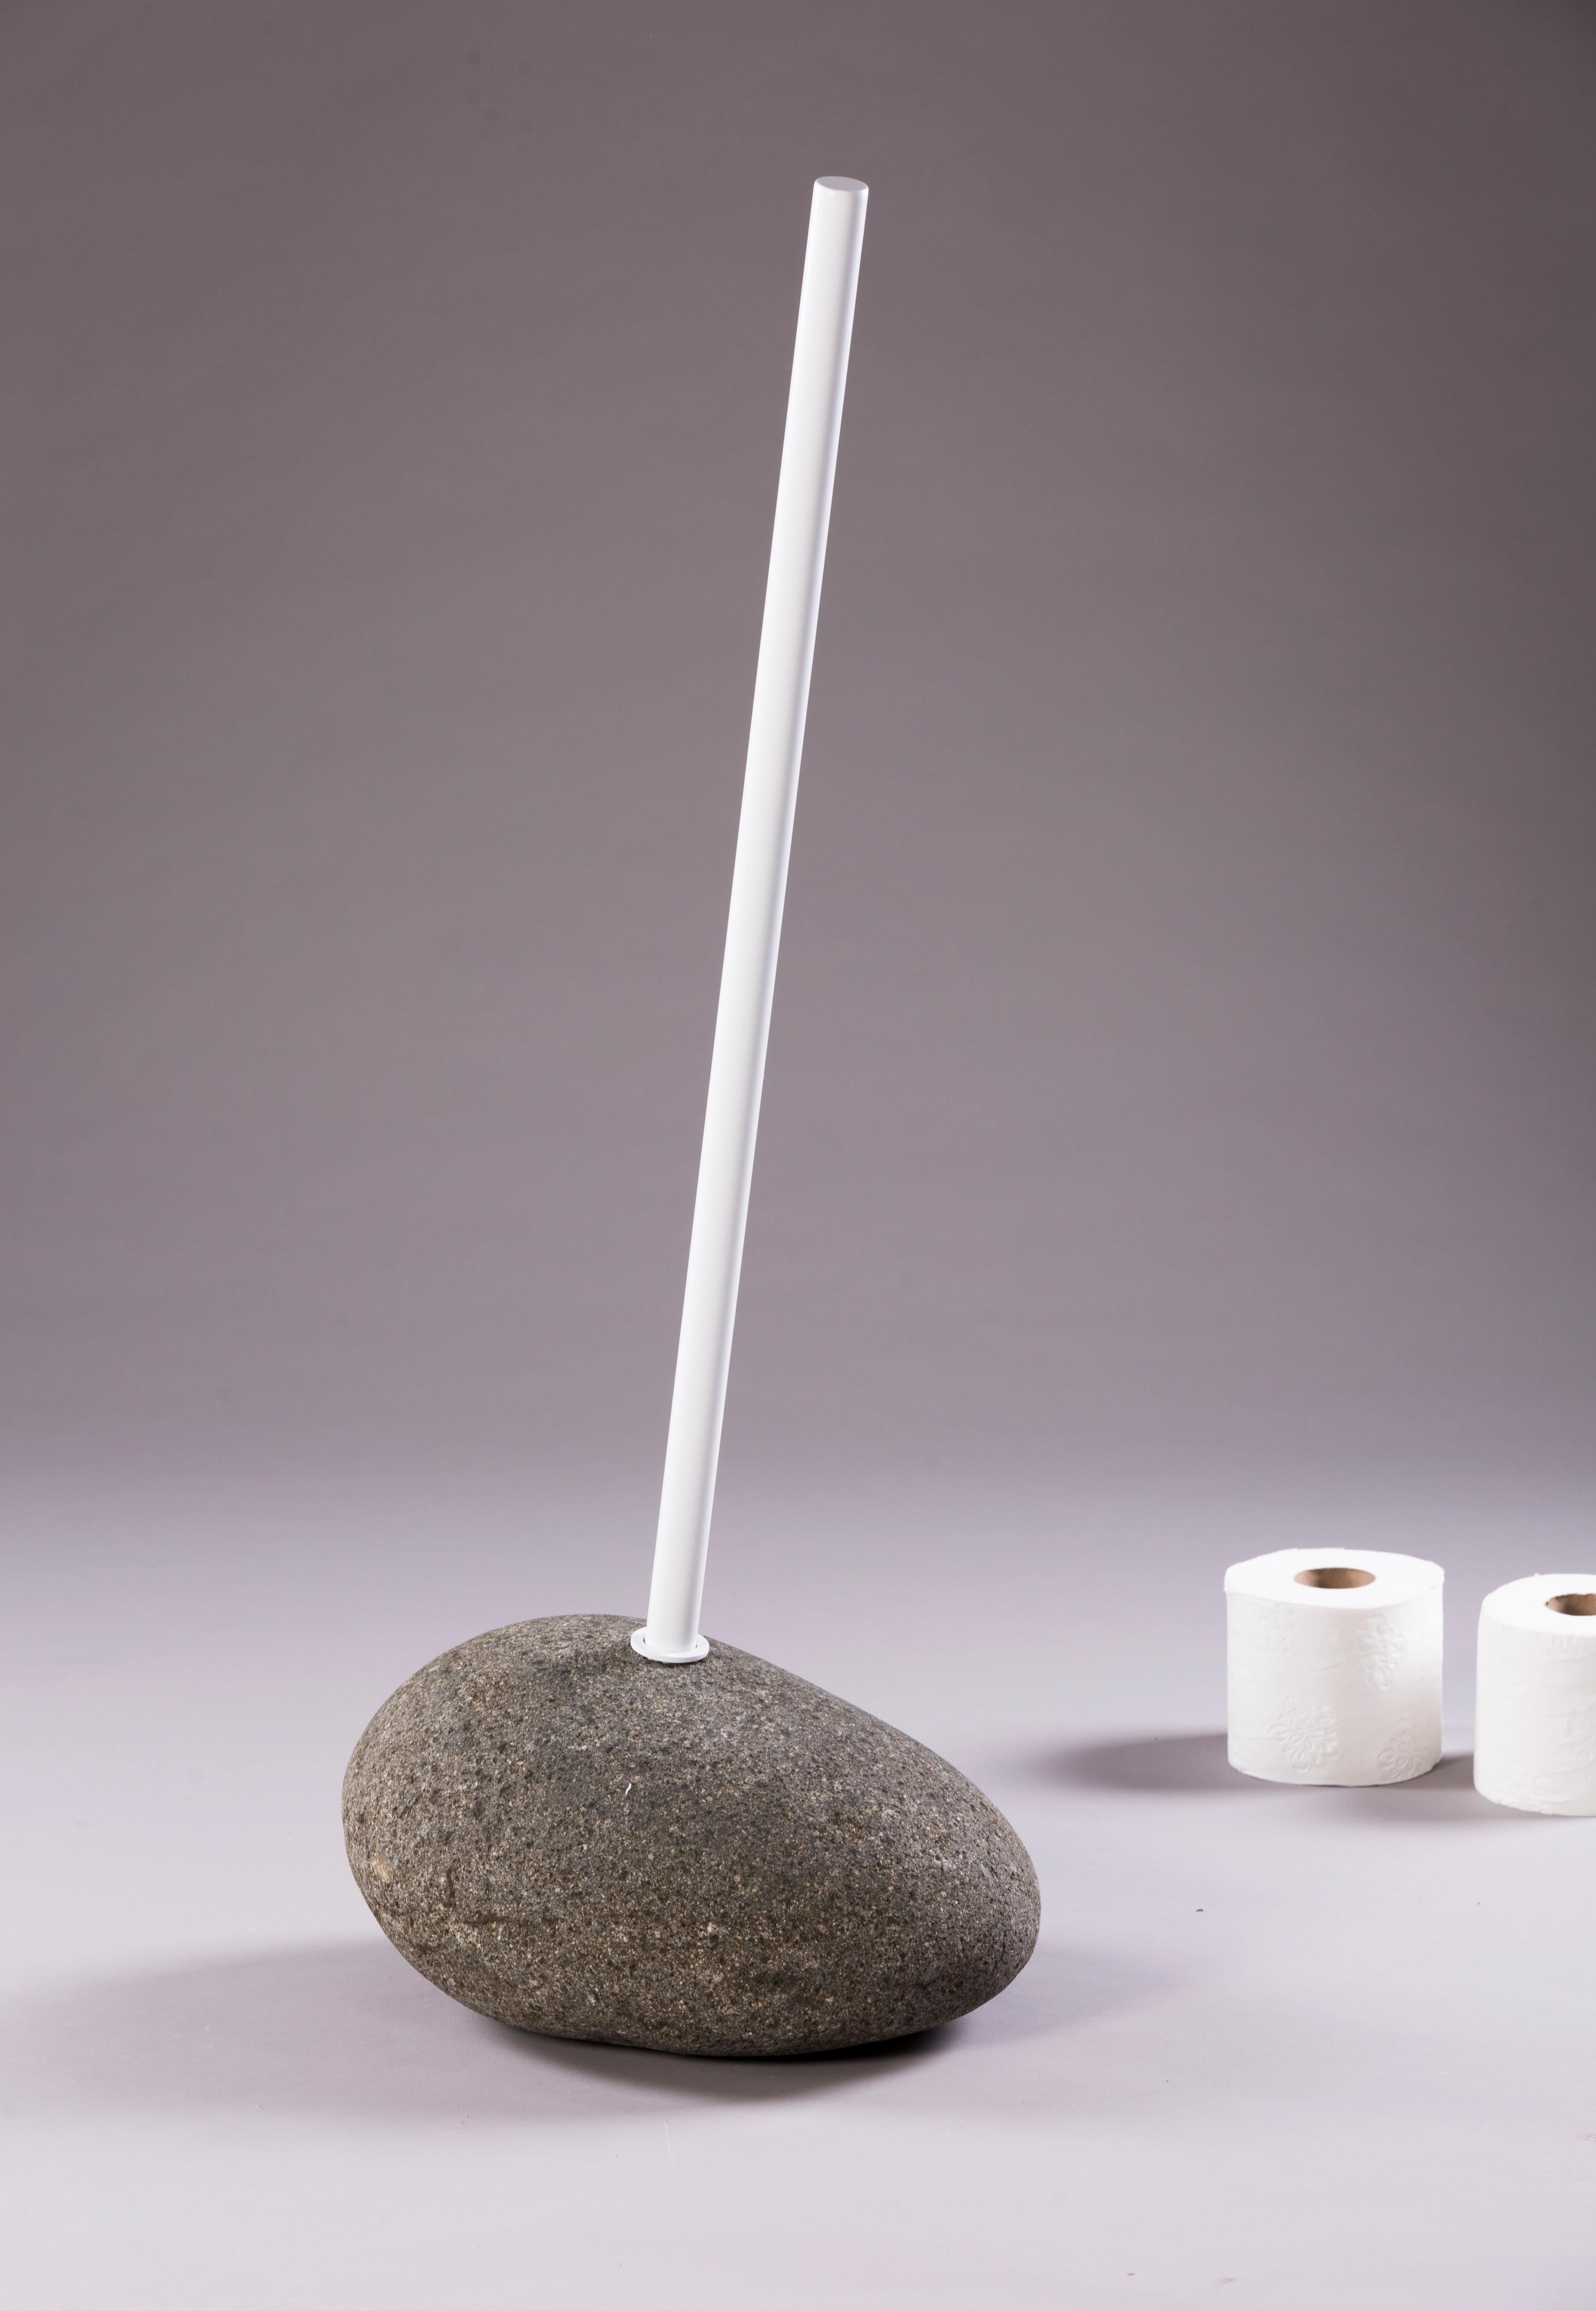 Nokta accessories III by Rectangle Studio
Dimensions: W 22 x H 100 cm
Materials: Natural stone, white paint coating on metal

We have interpreted nature's imperceptible form understanding and brought it to you as an accessory.
Nokta is shaped